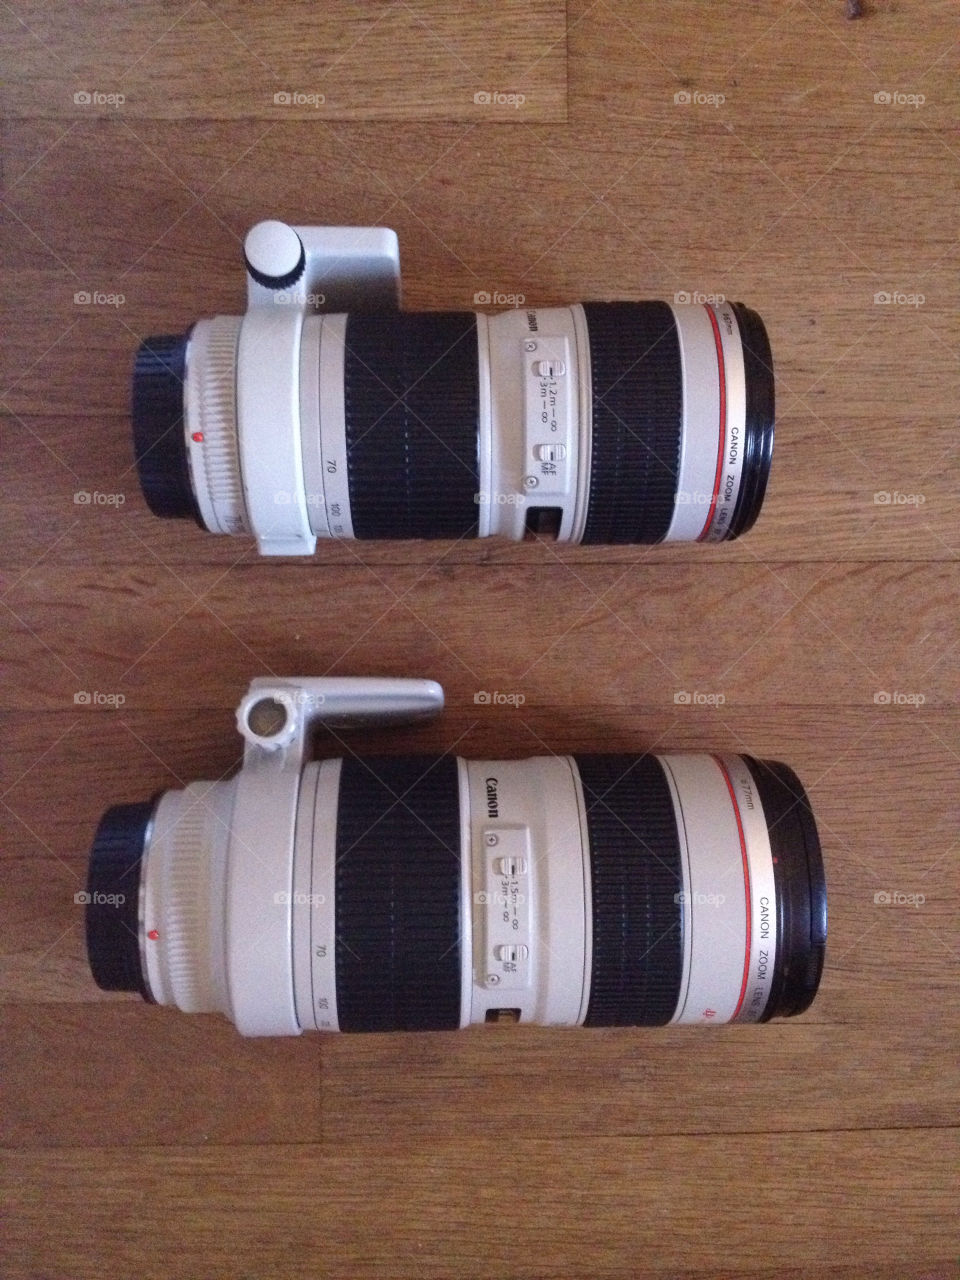 lens canon 70-200mm by enag